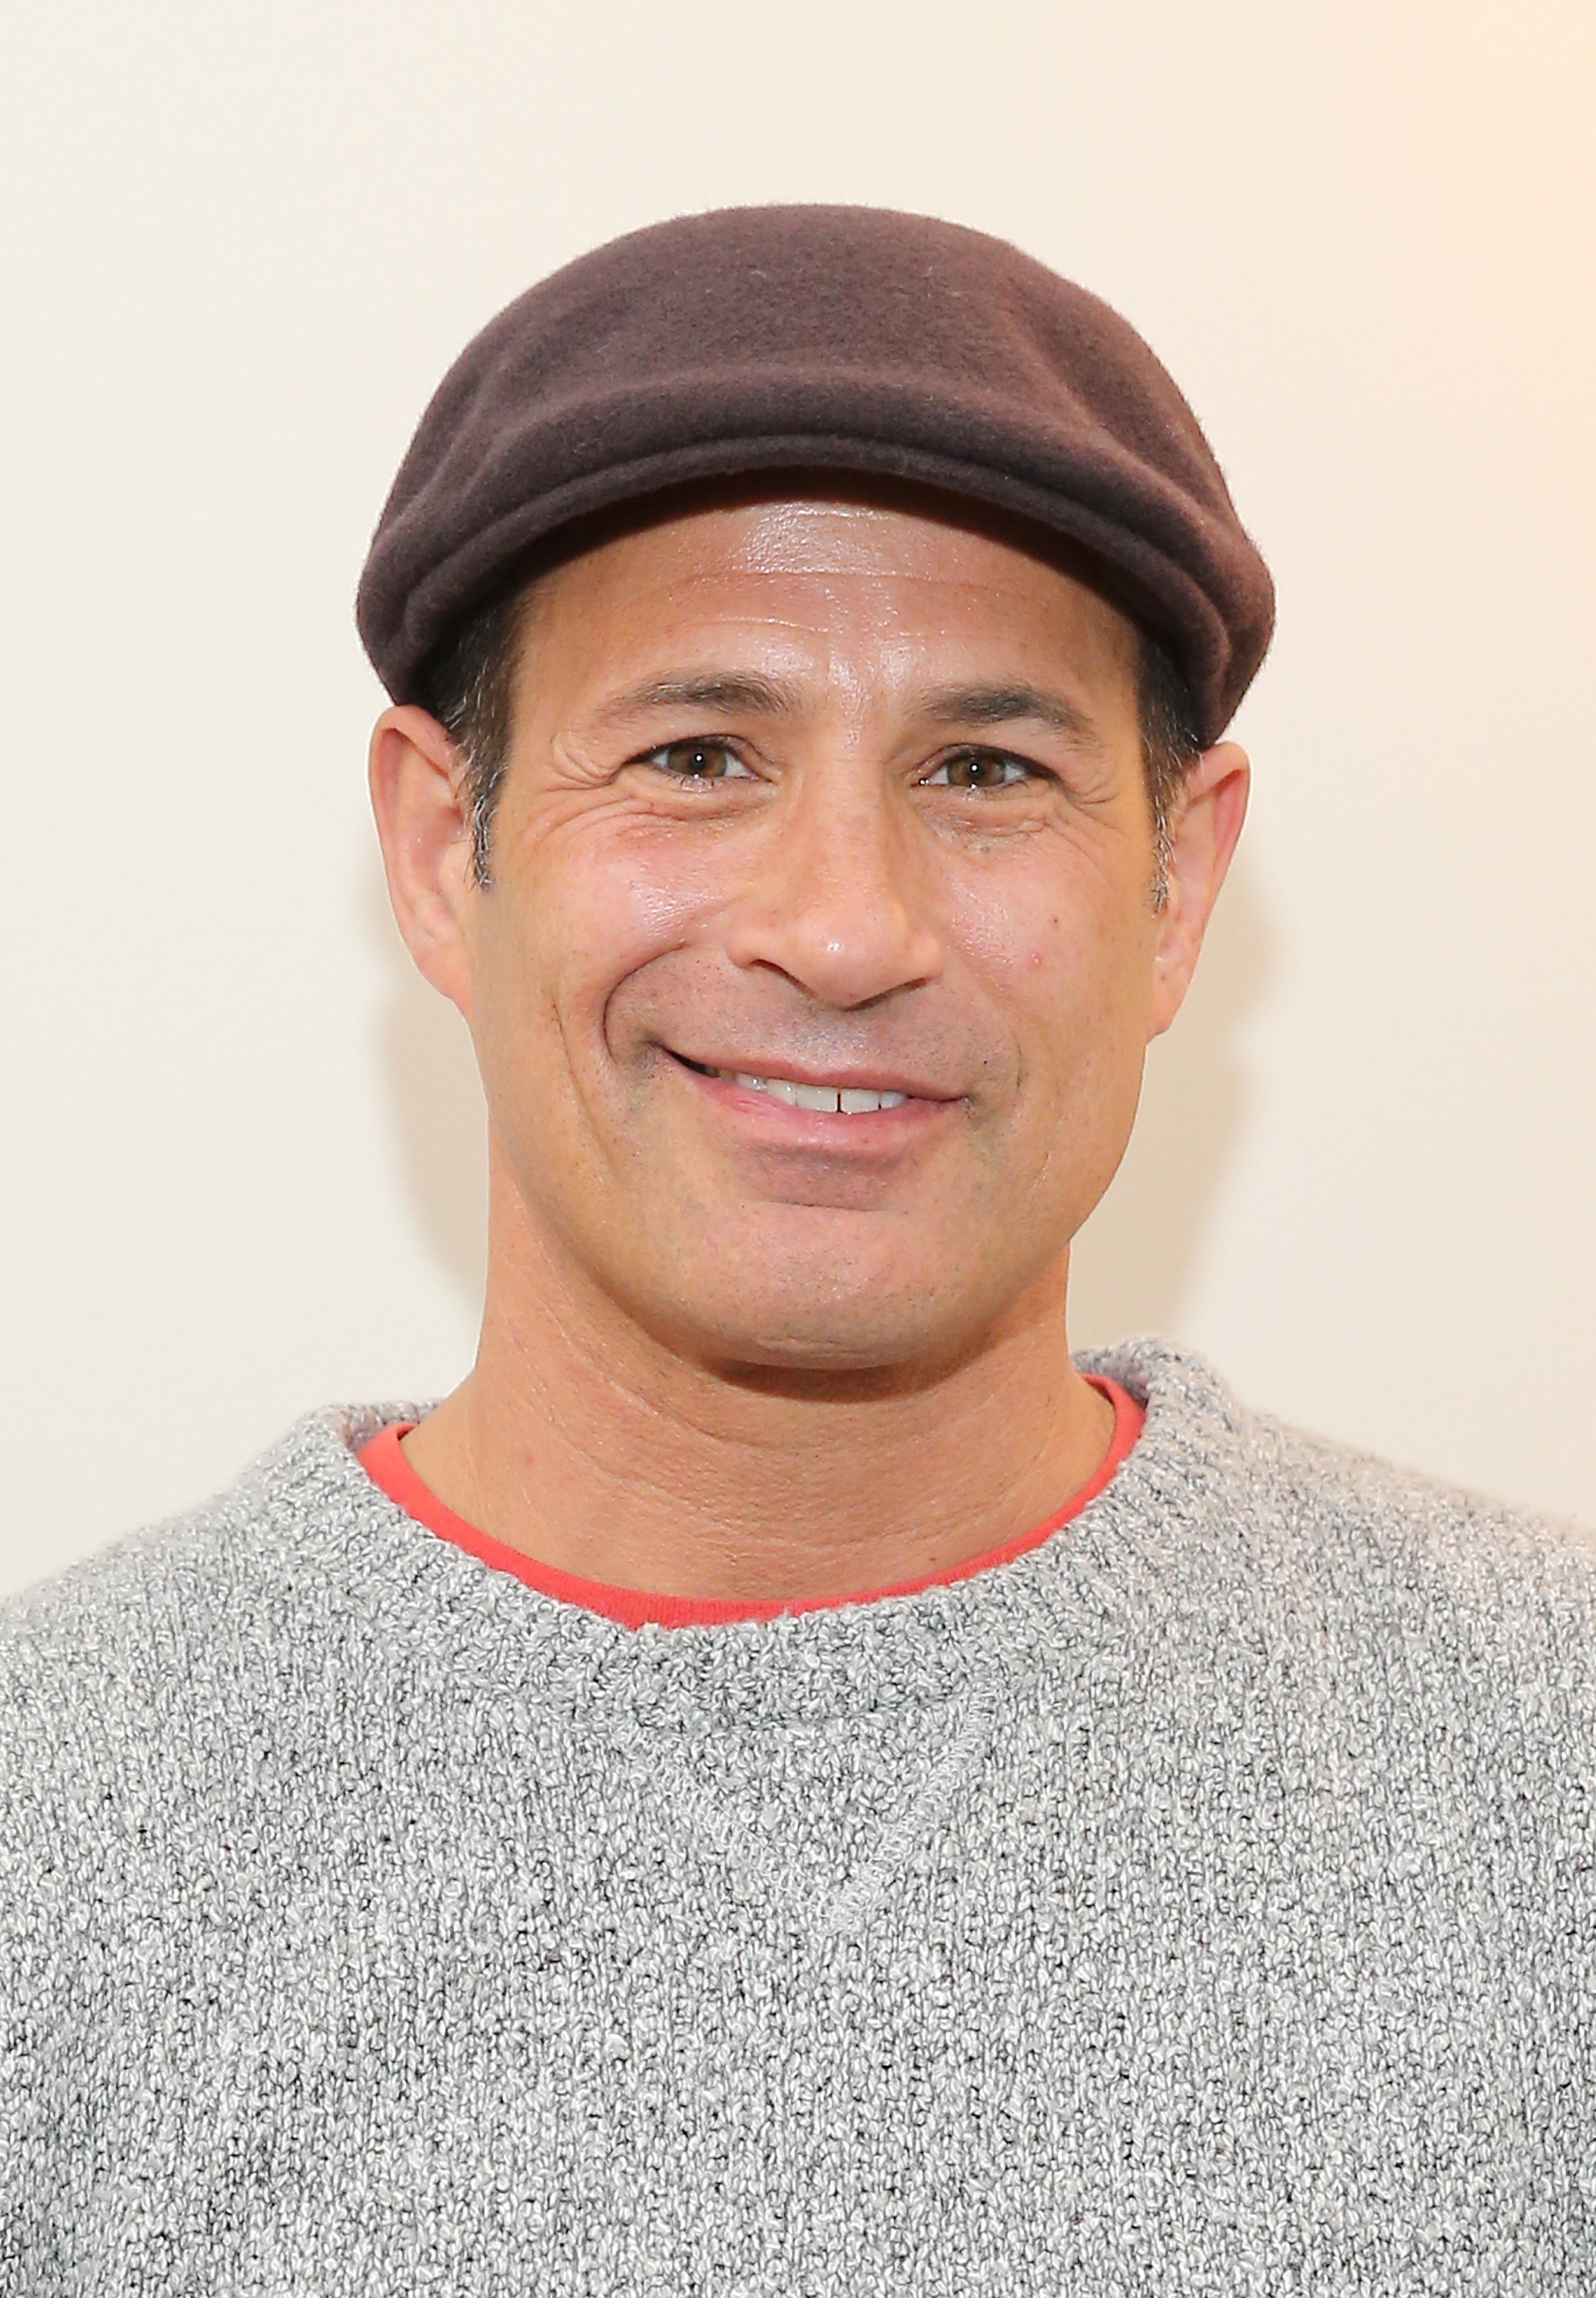 Sam Calagione at the Record Store Day 2016 Announcement at Electric Lady Studio in New York City on March 8, 2016.